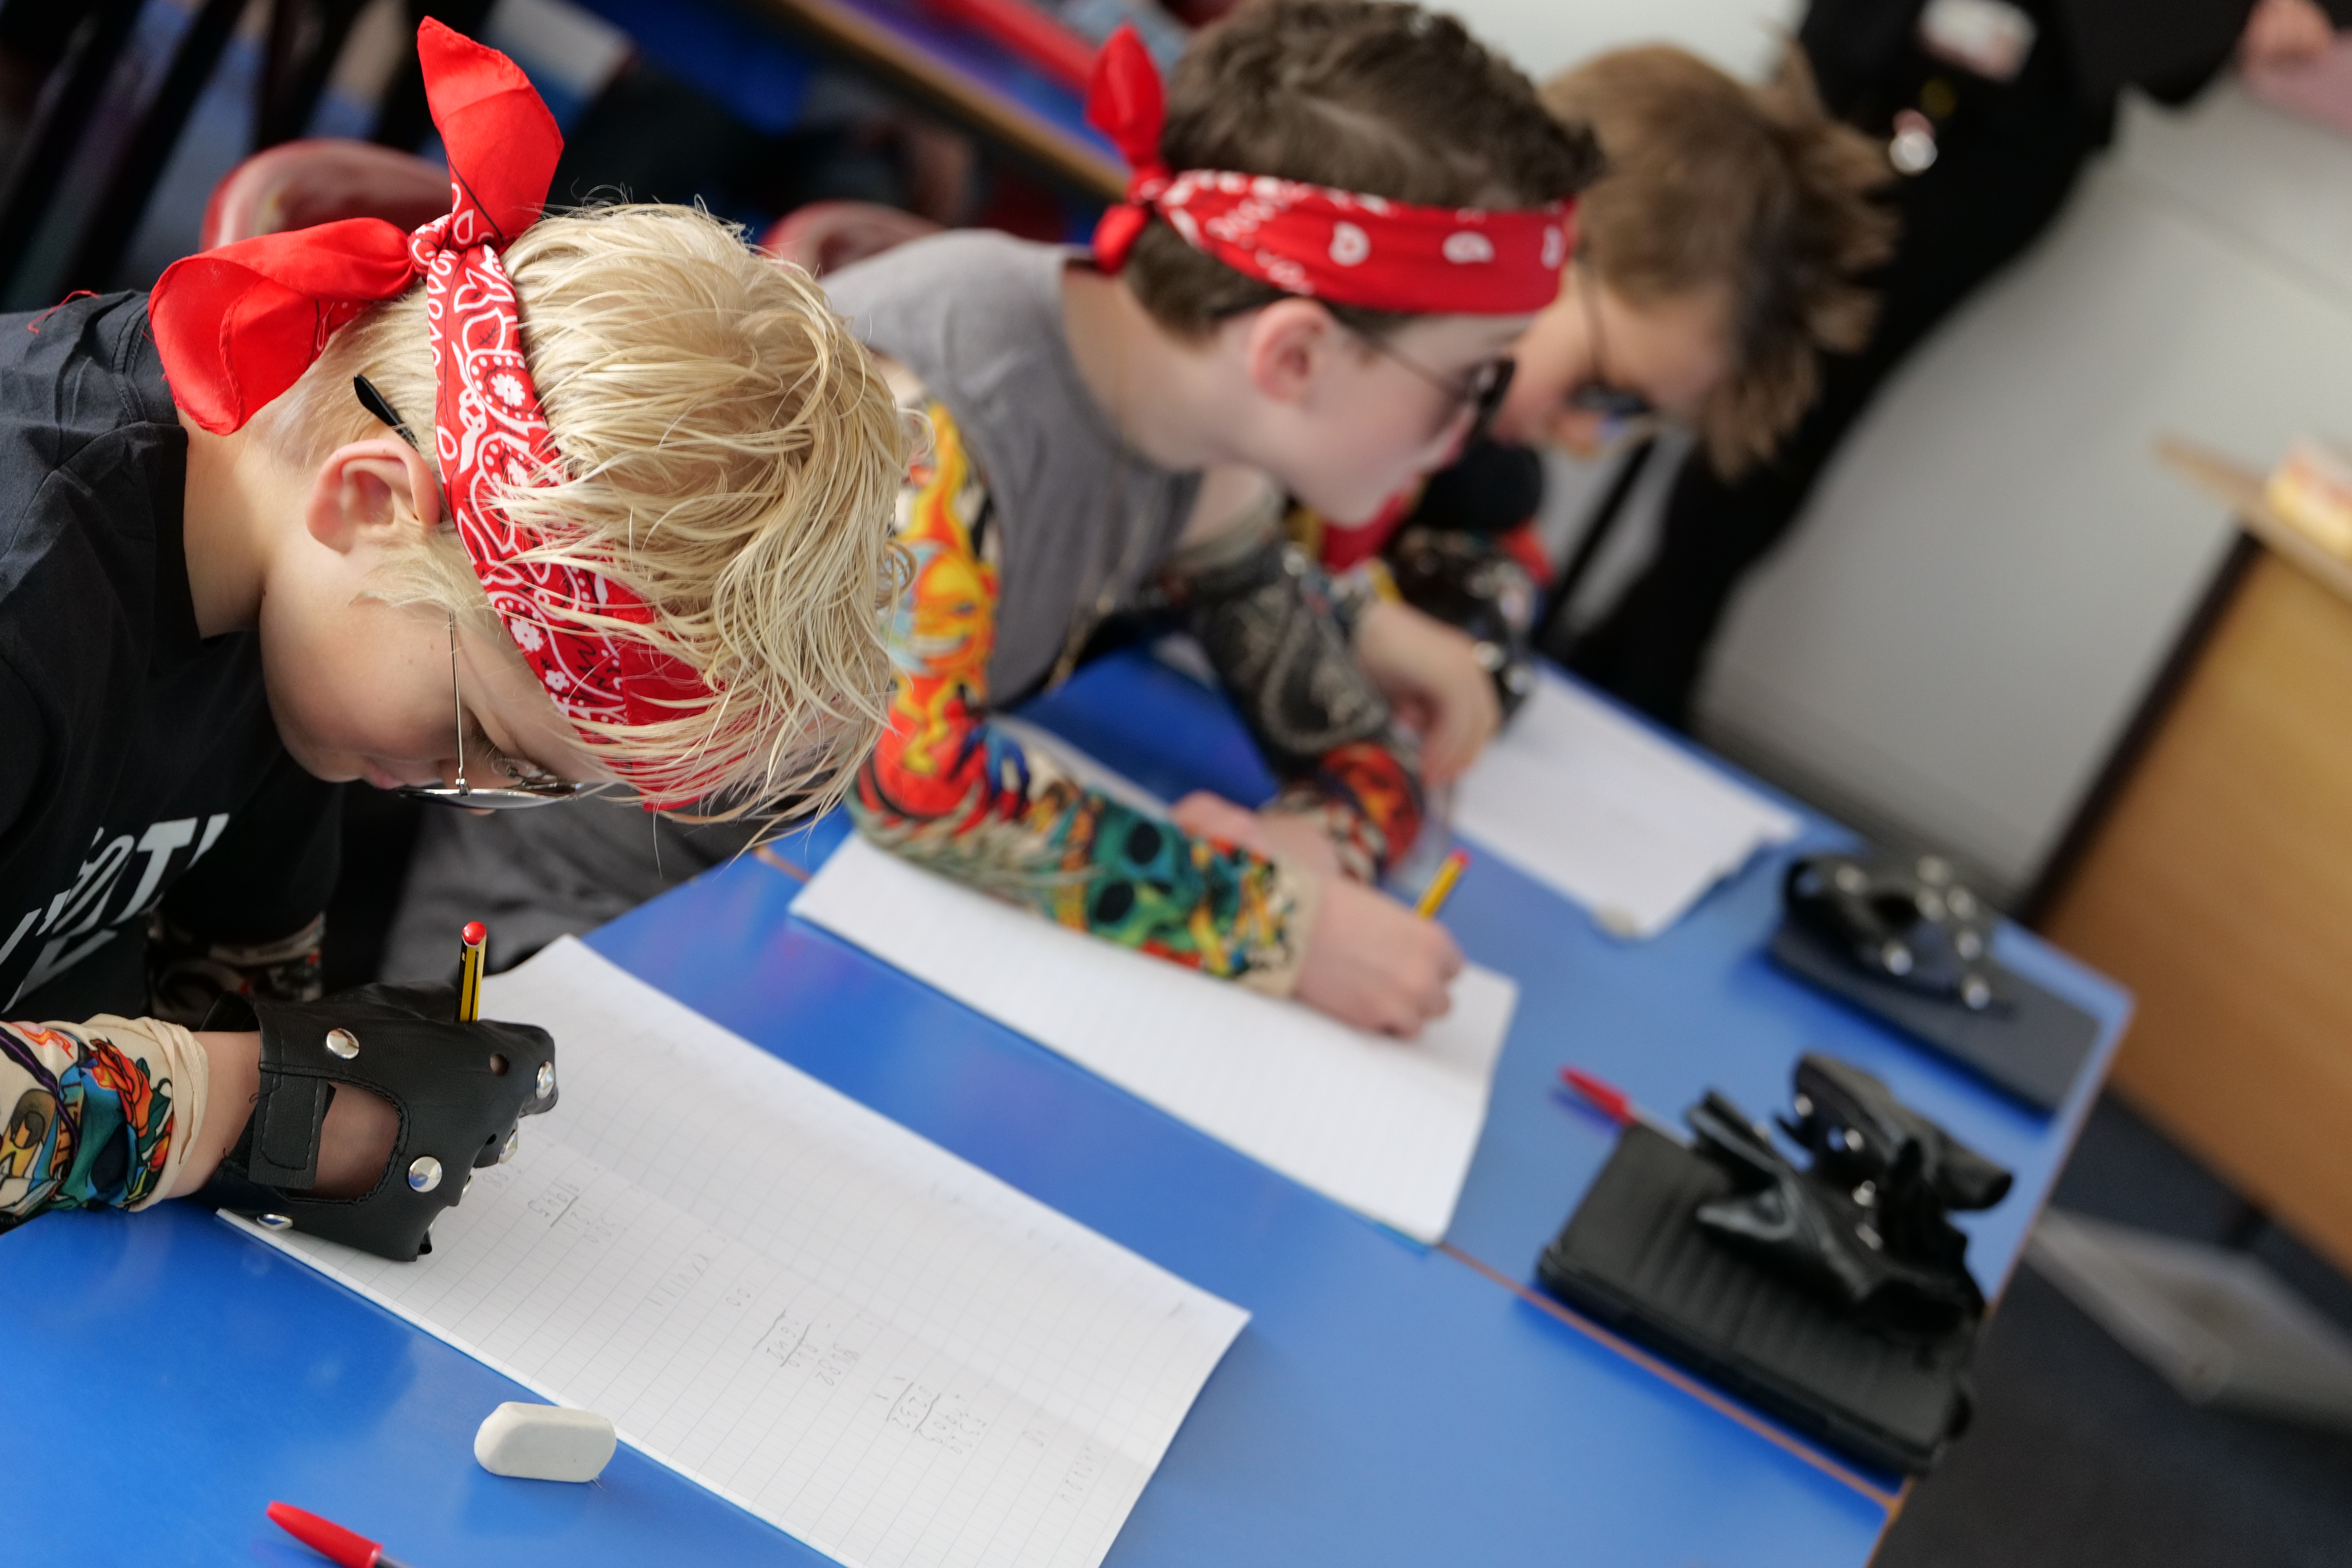 Students doing maths while dressed as rockstars